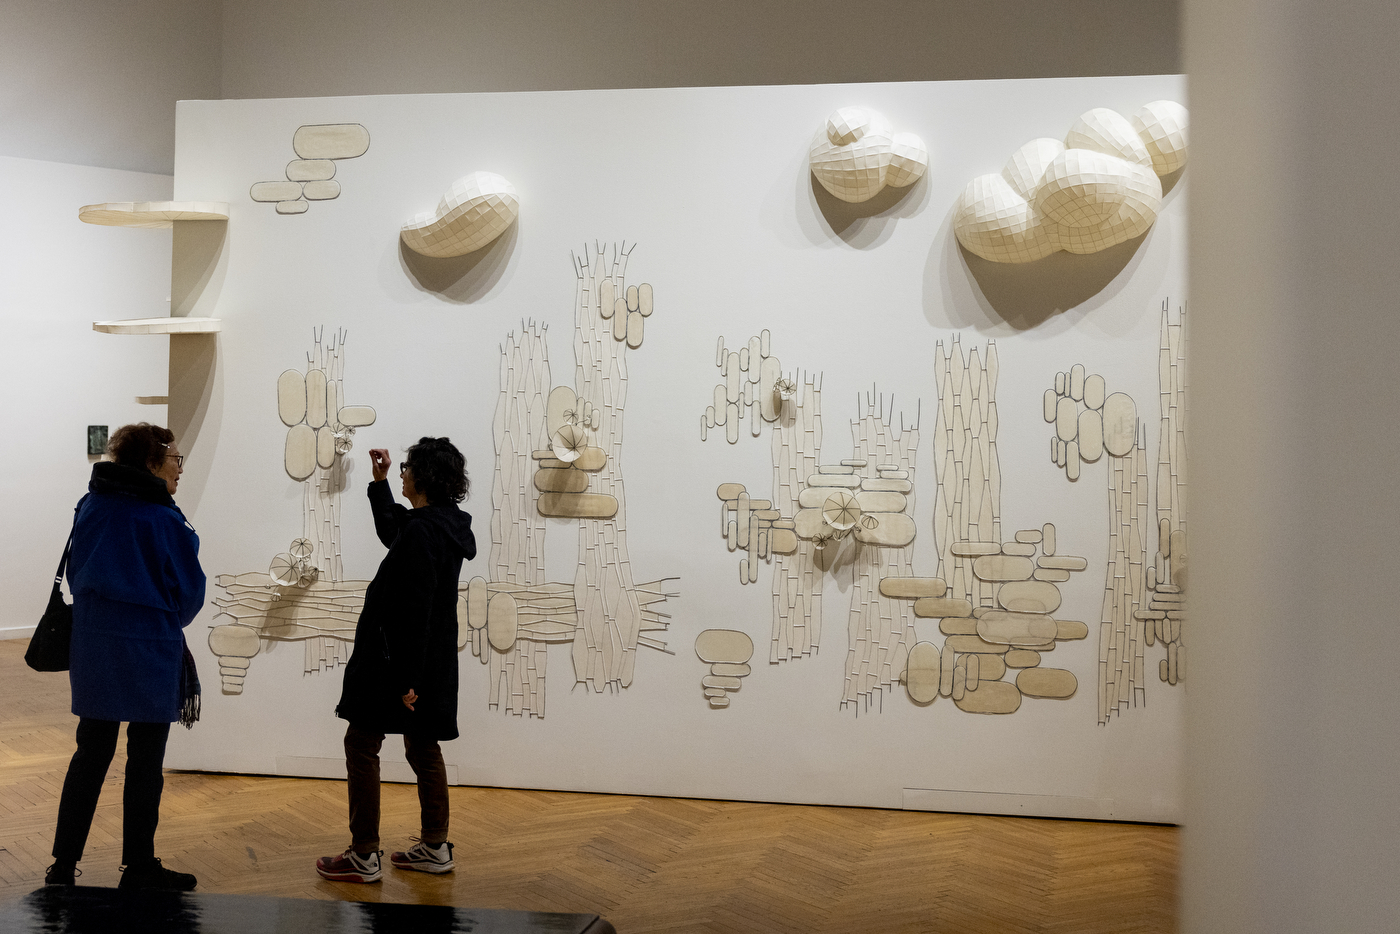 Two people standing in front of a wall sized art display.